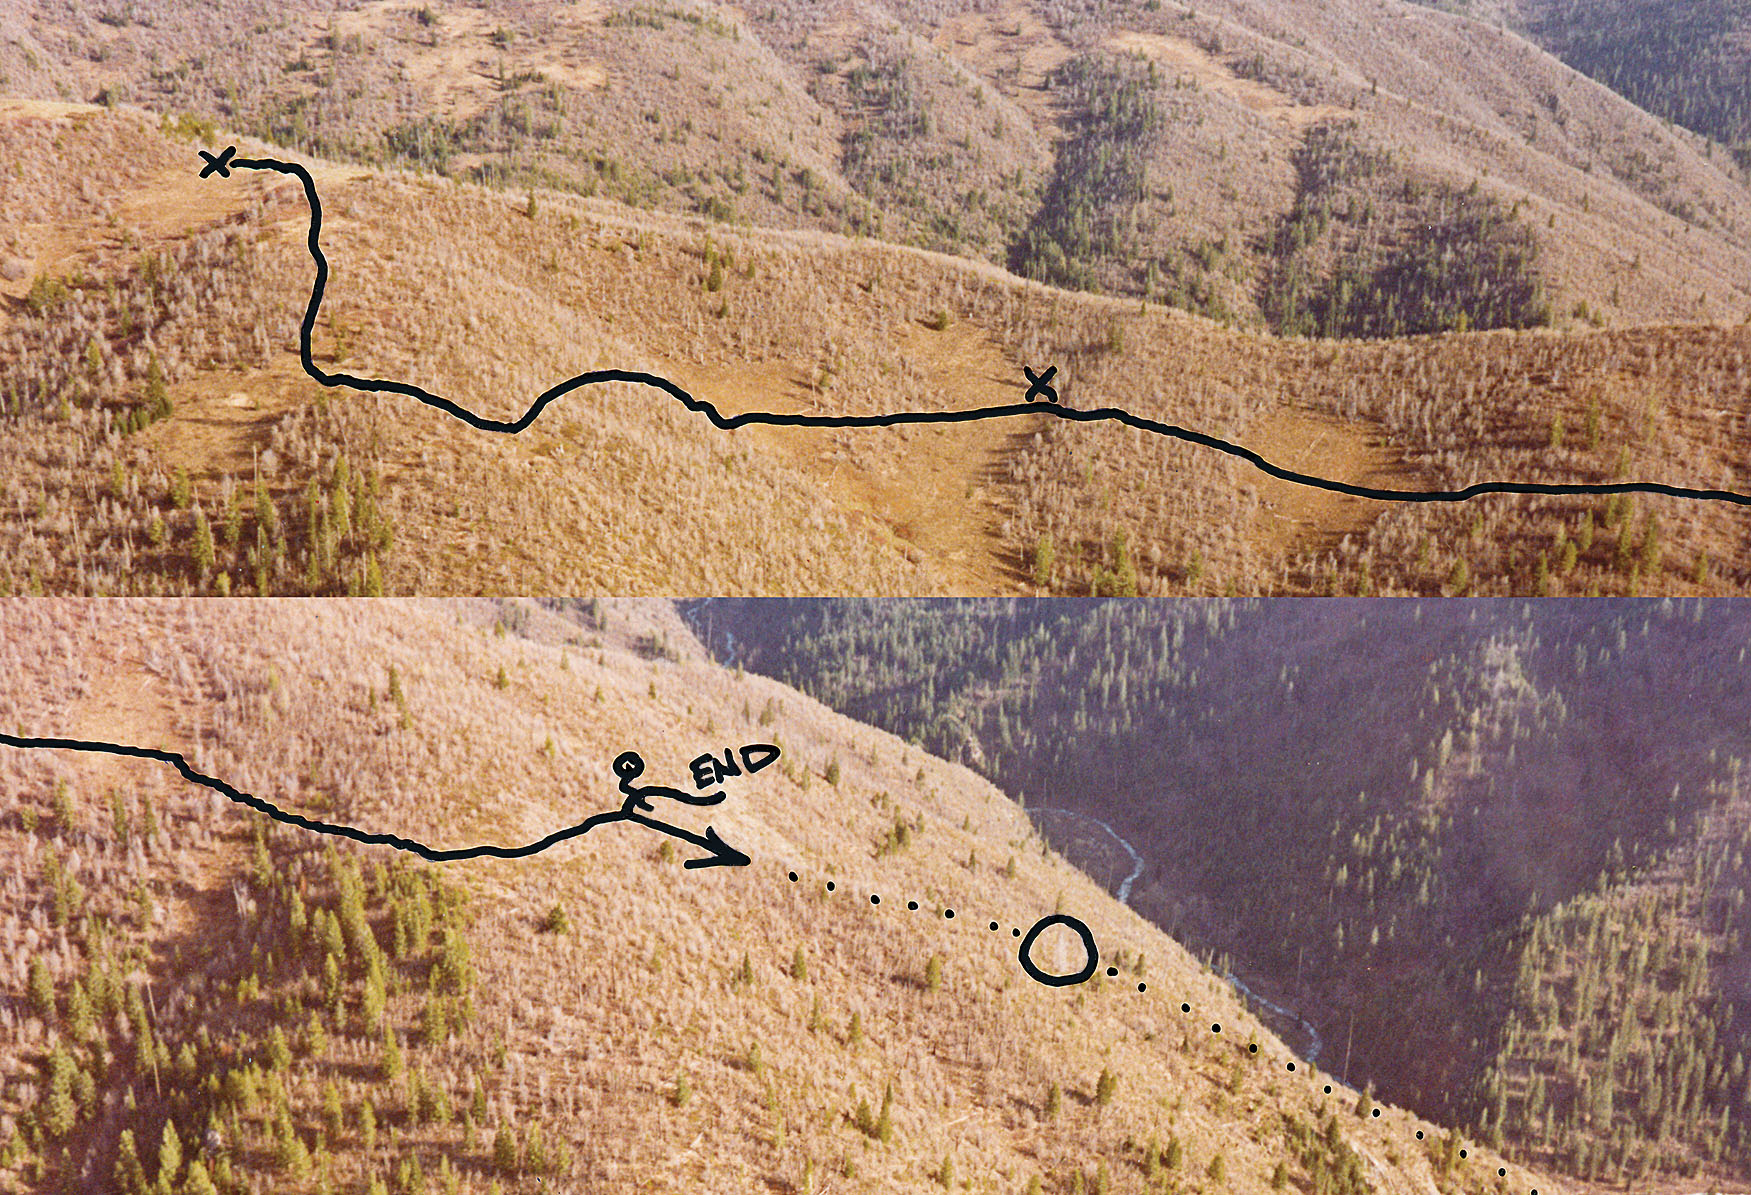 A diagram George mad showing the route he used while horseback hunting.